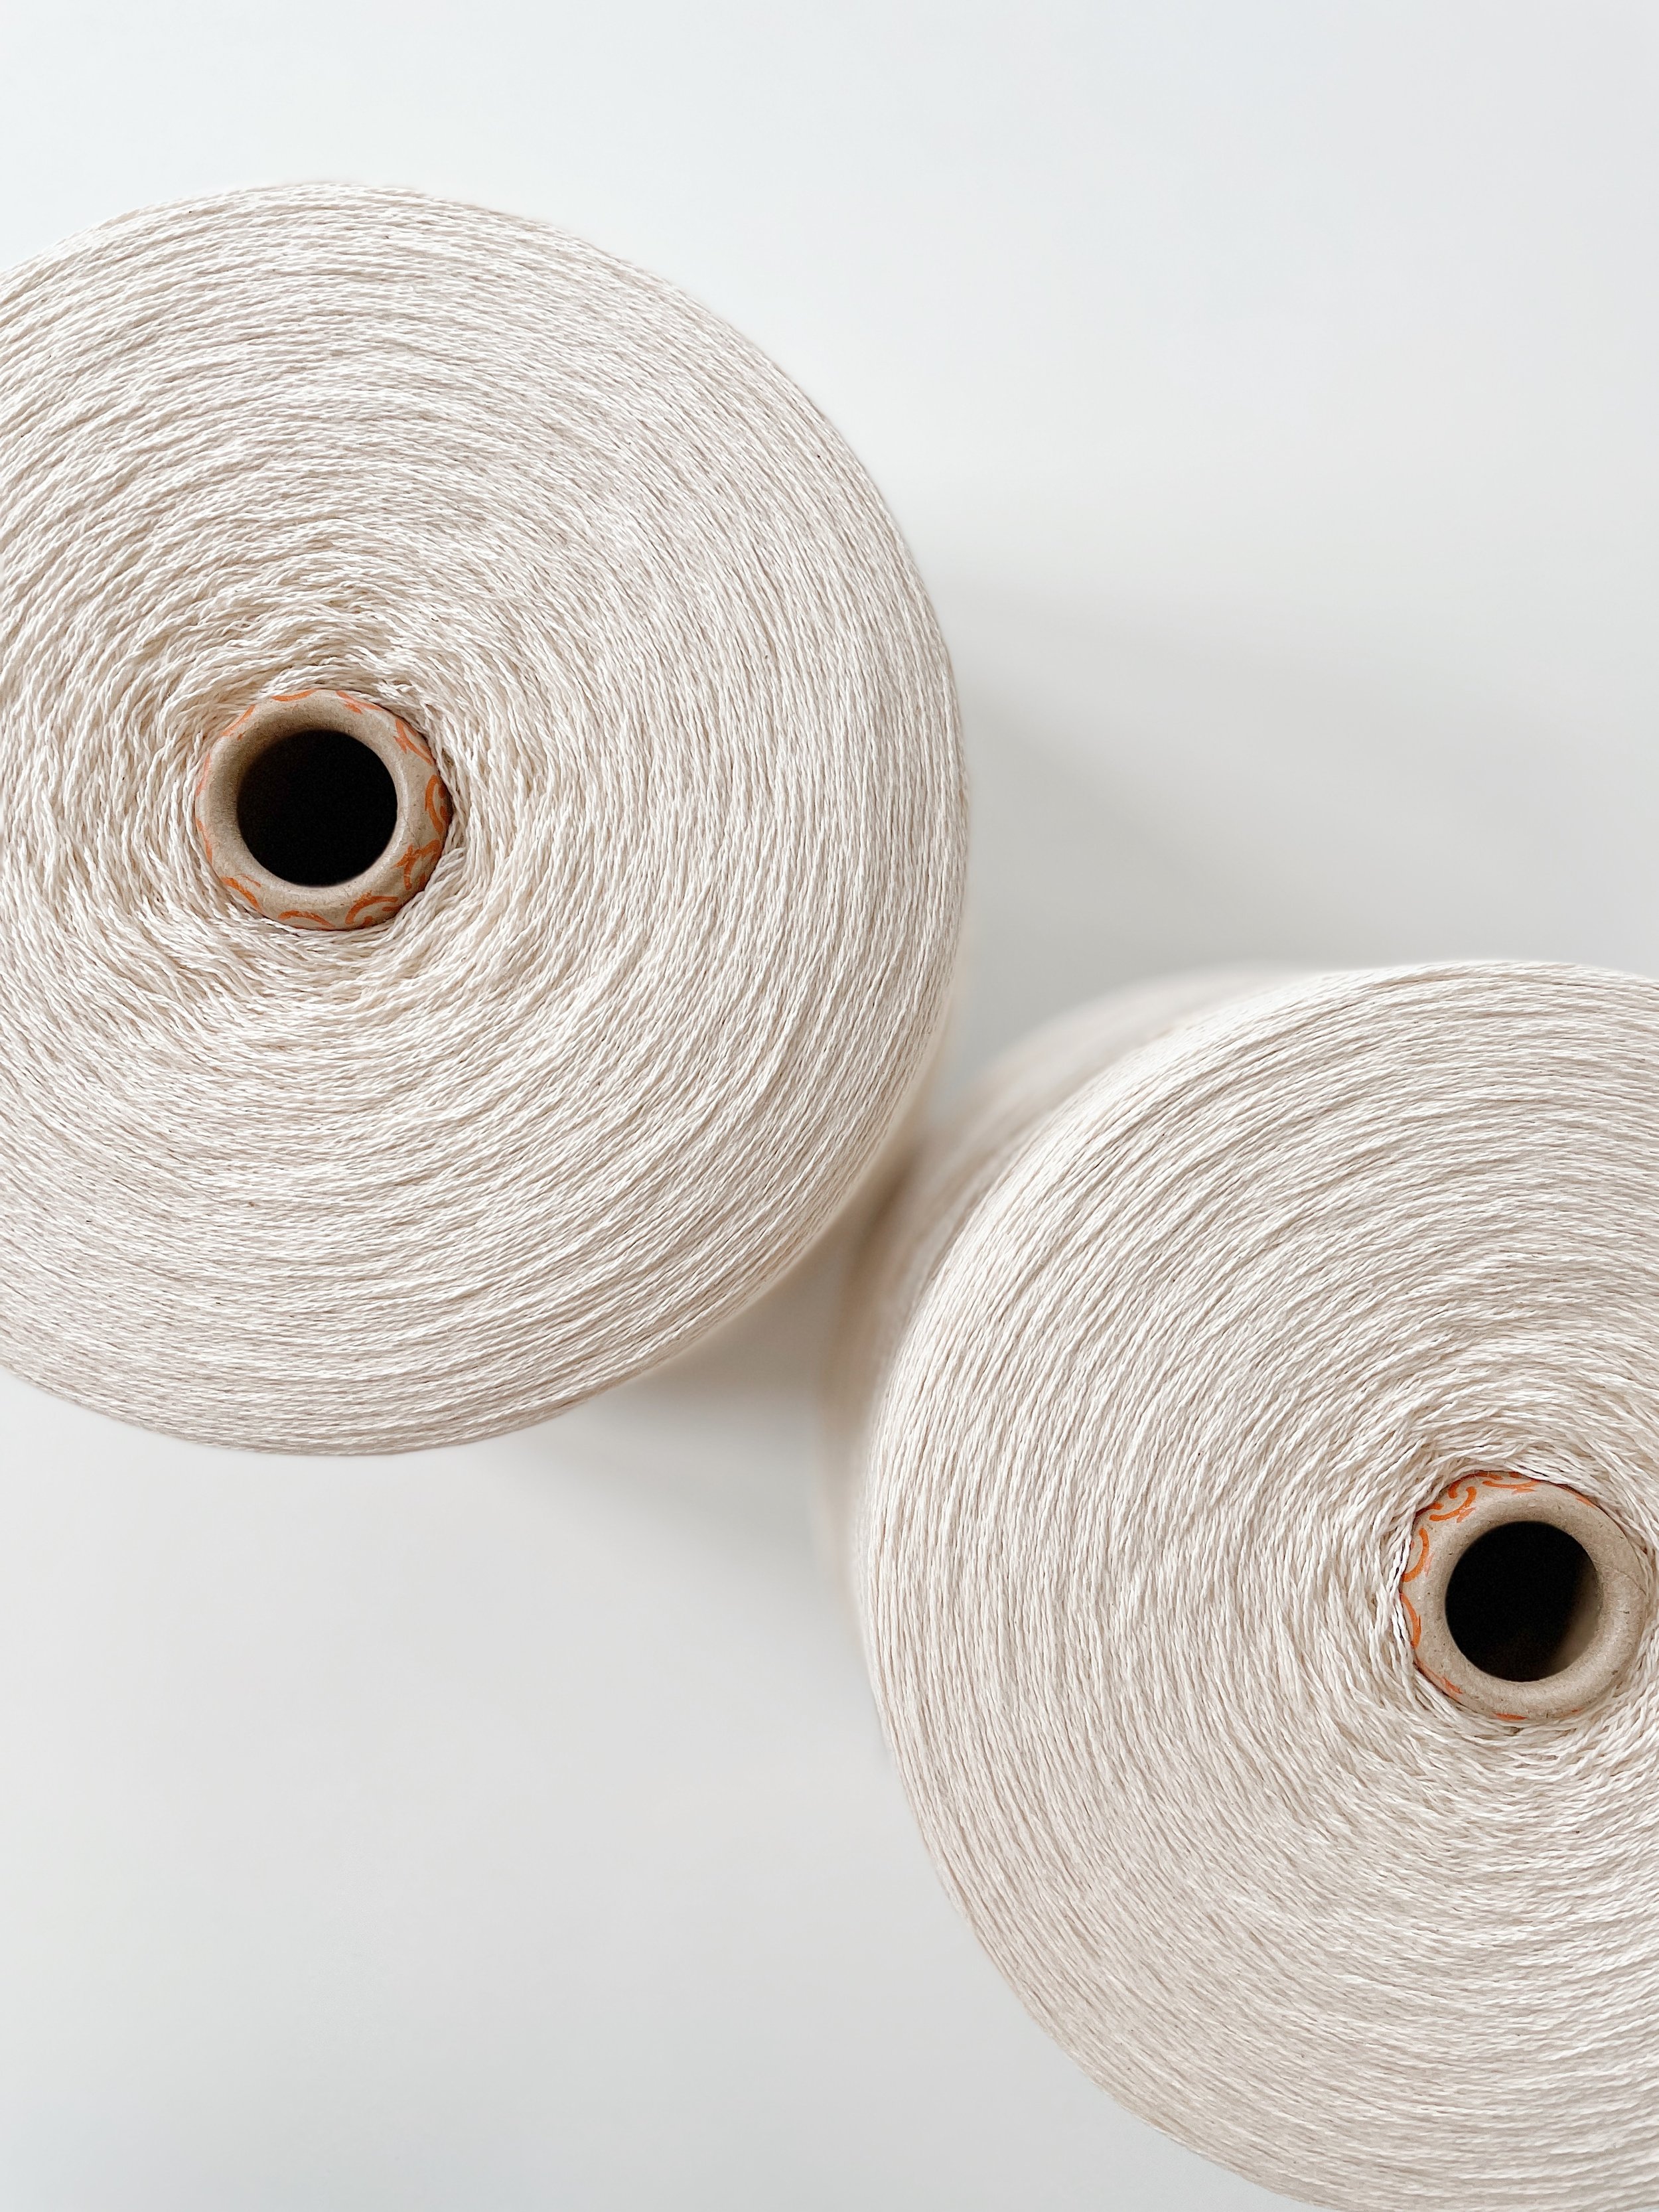 Product Details, 0 Natural White - Thread, Serenity (8/2 reeled), Serenity (8/2 reeled thread), Threads & Ribbons